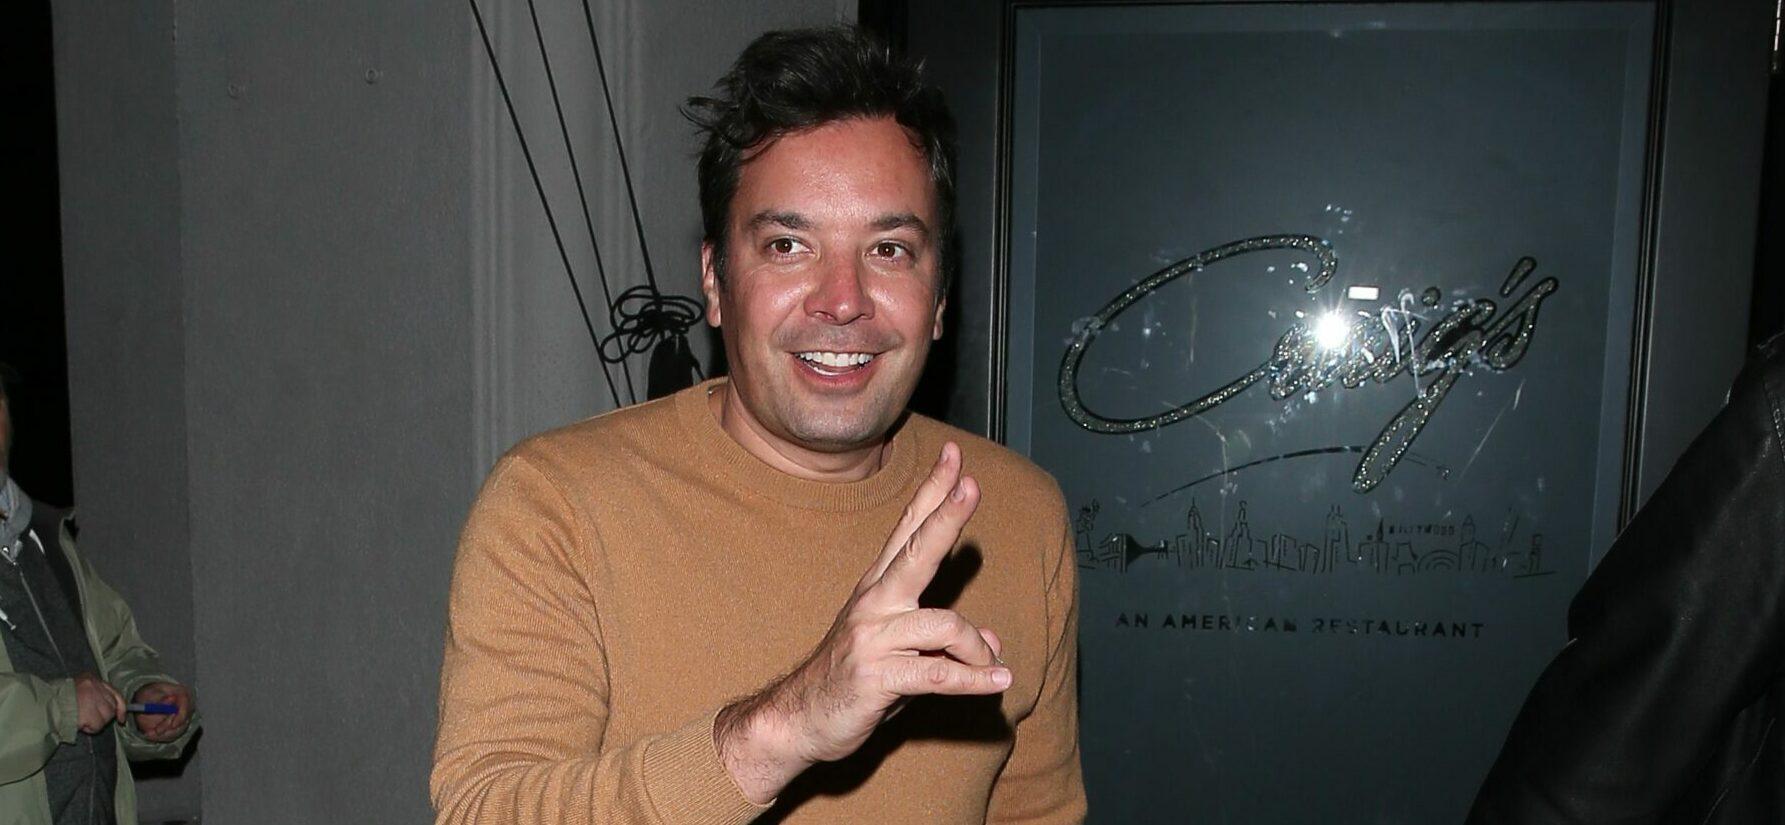 Jimmy Fallon is seen leaving dinner at Craig apos s Restaurant in West Hollywood